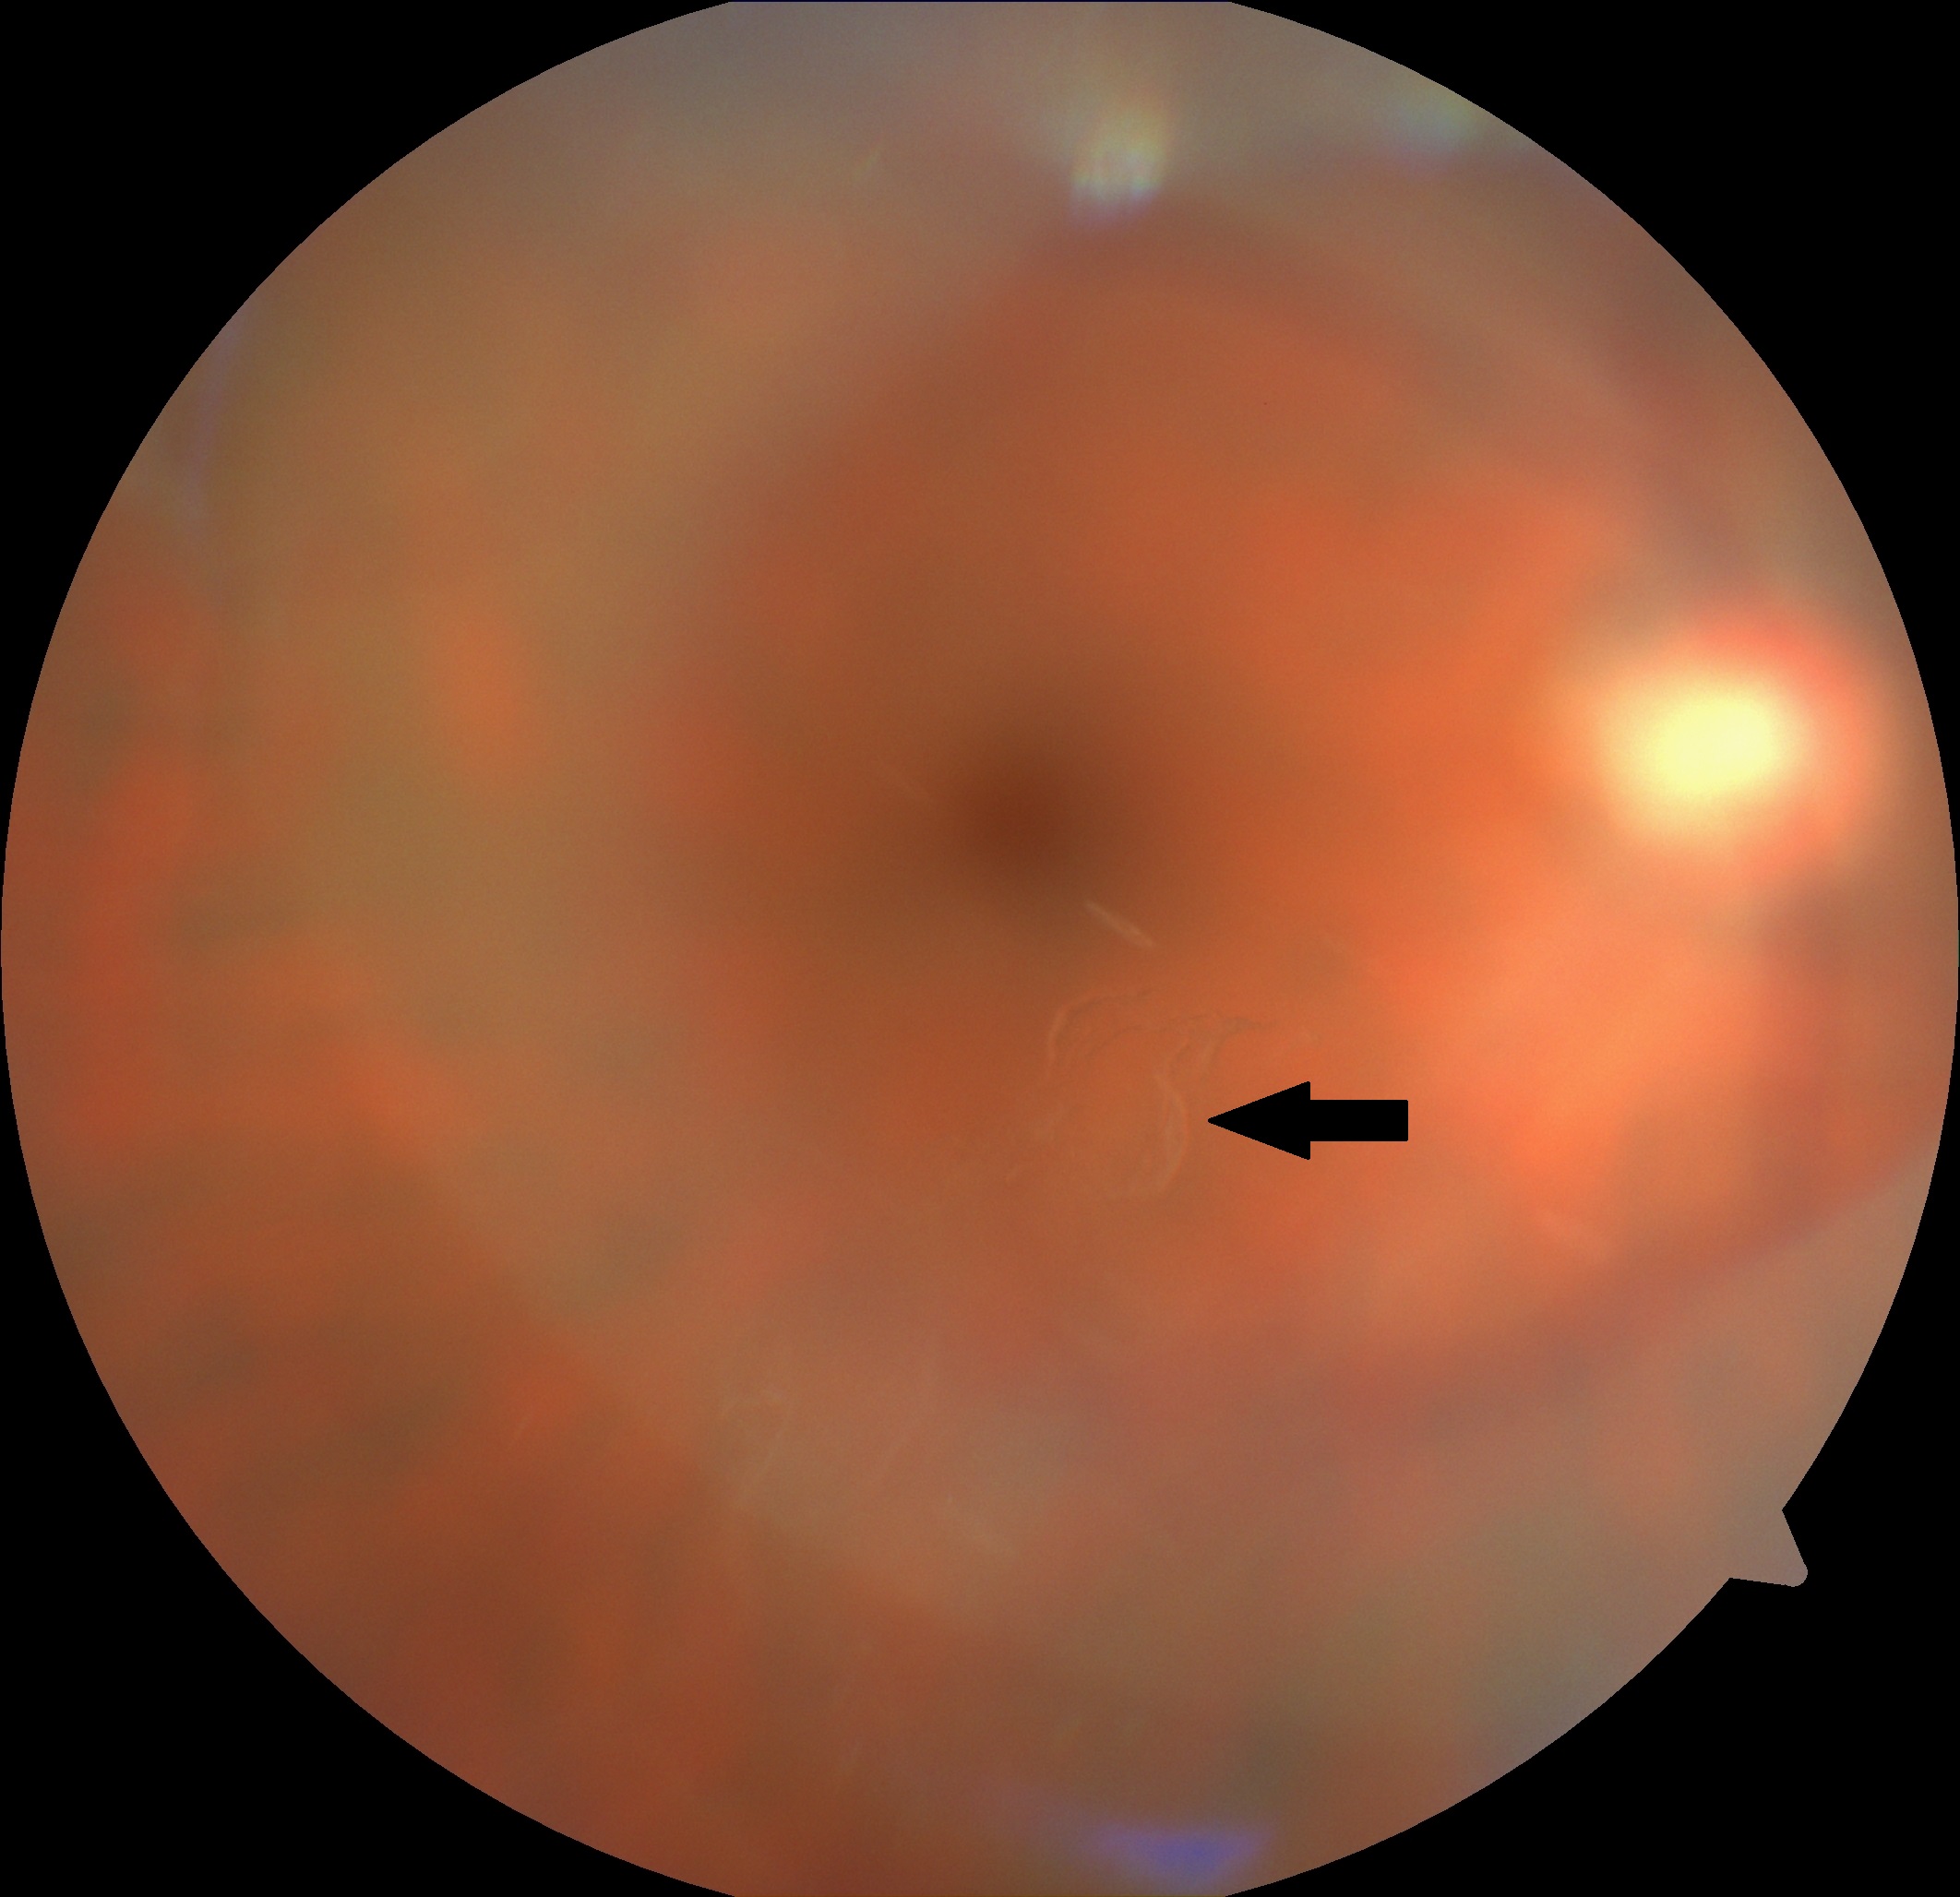 Color fundus photo showing a Weiss ring